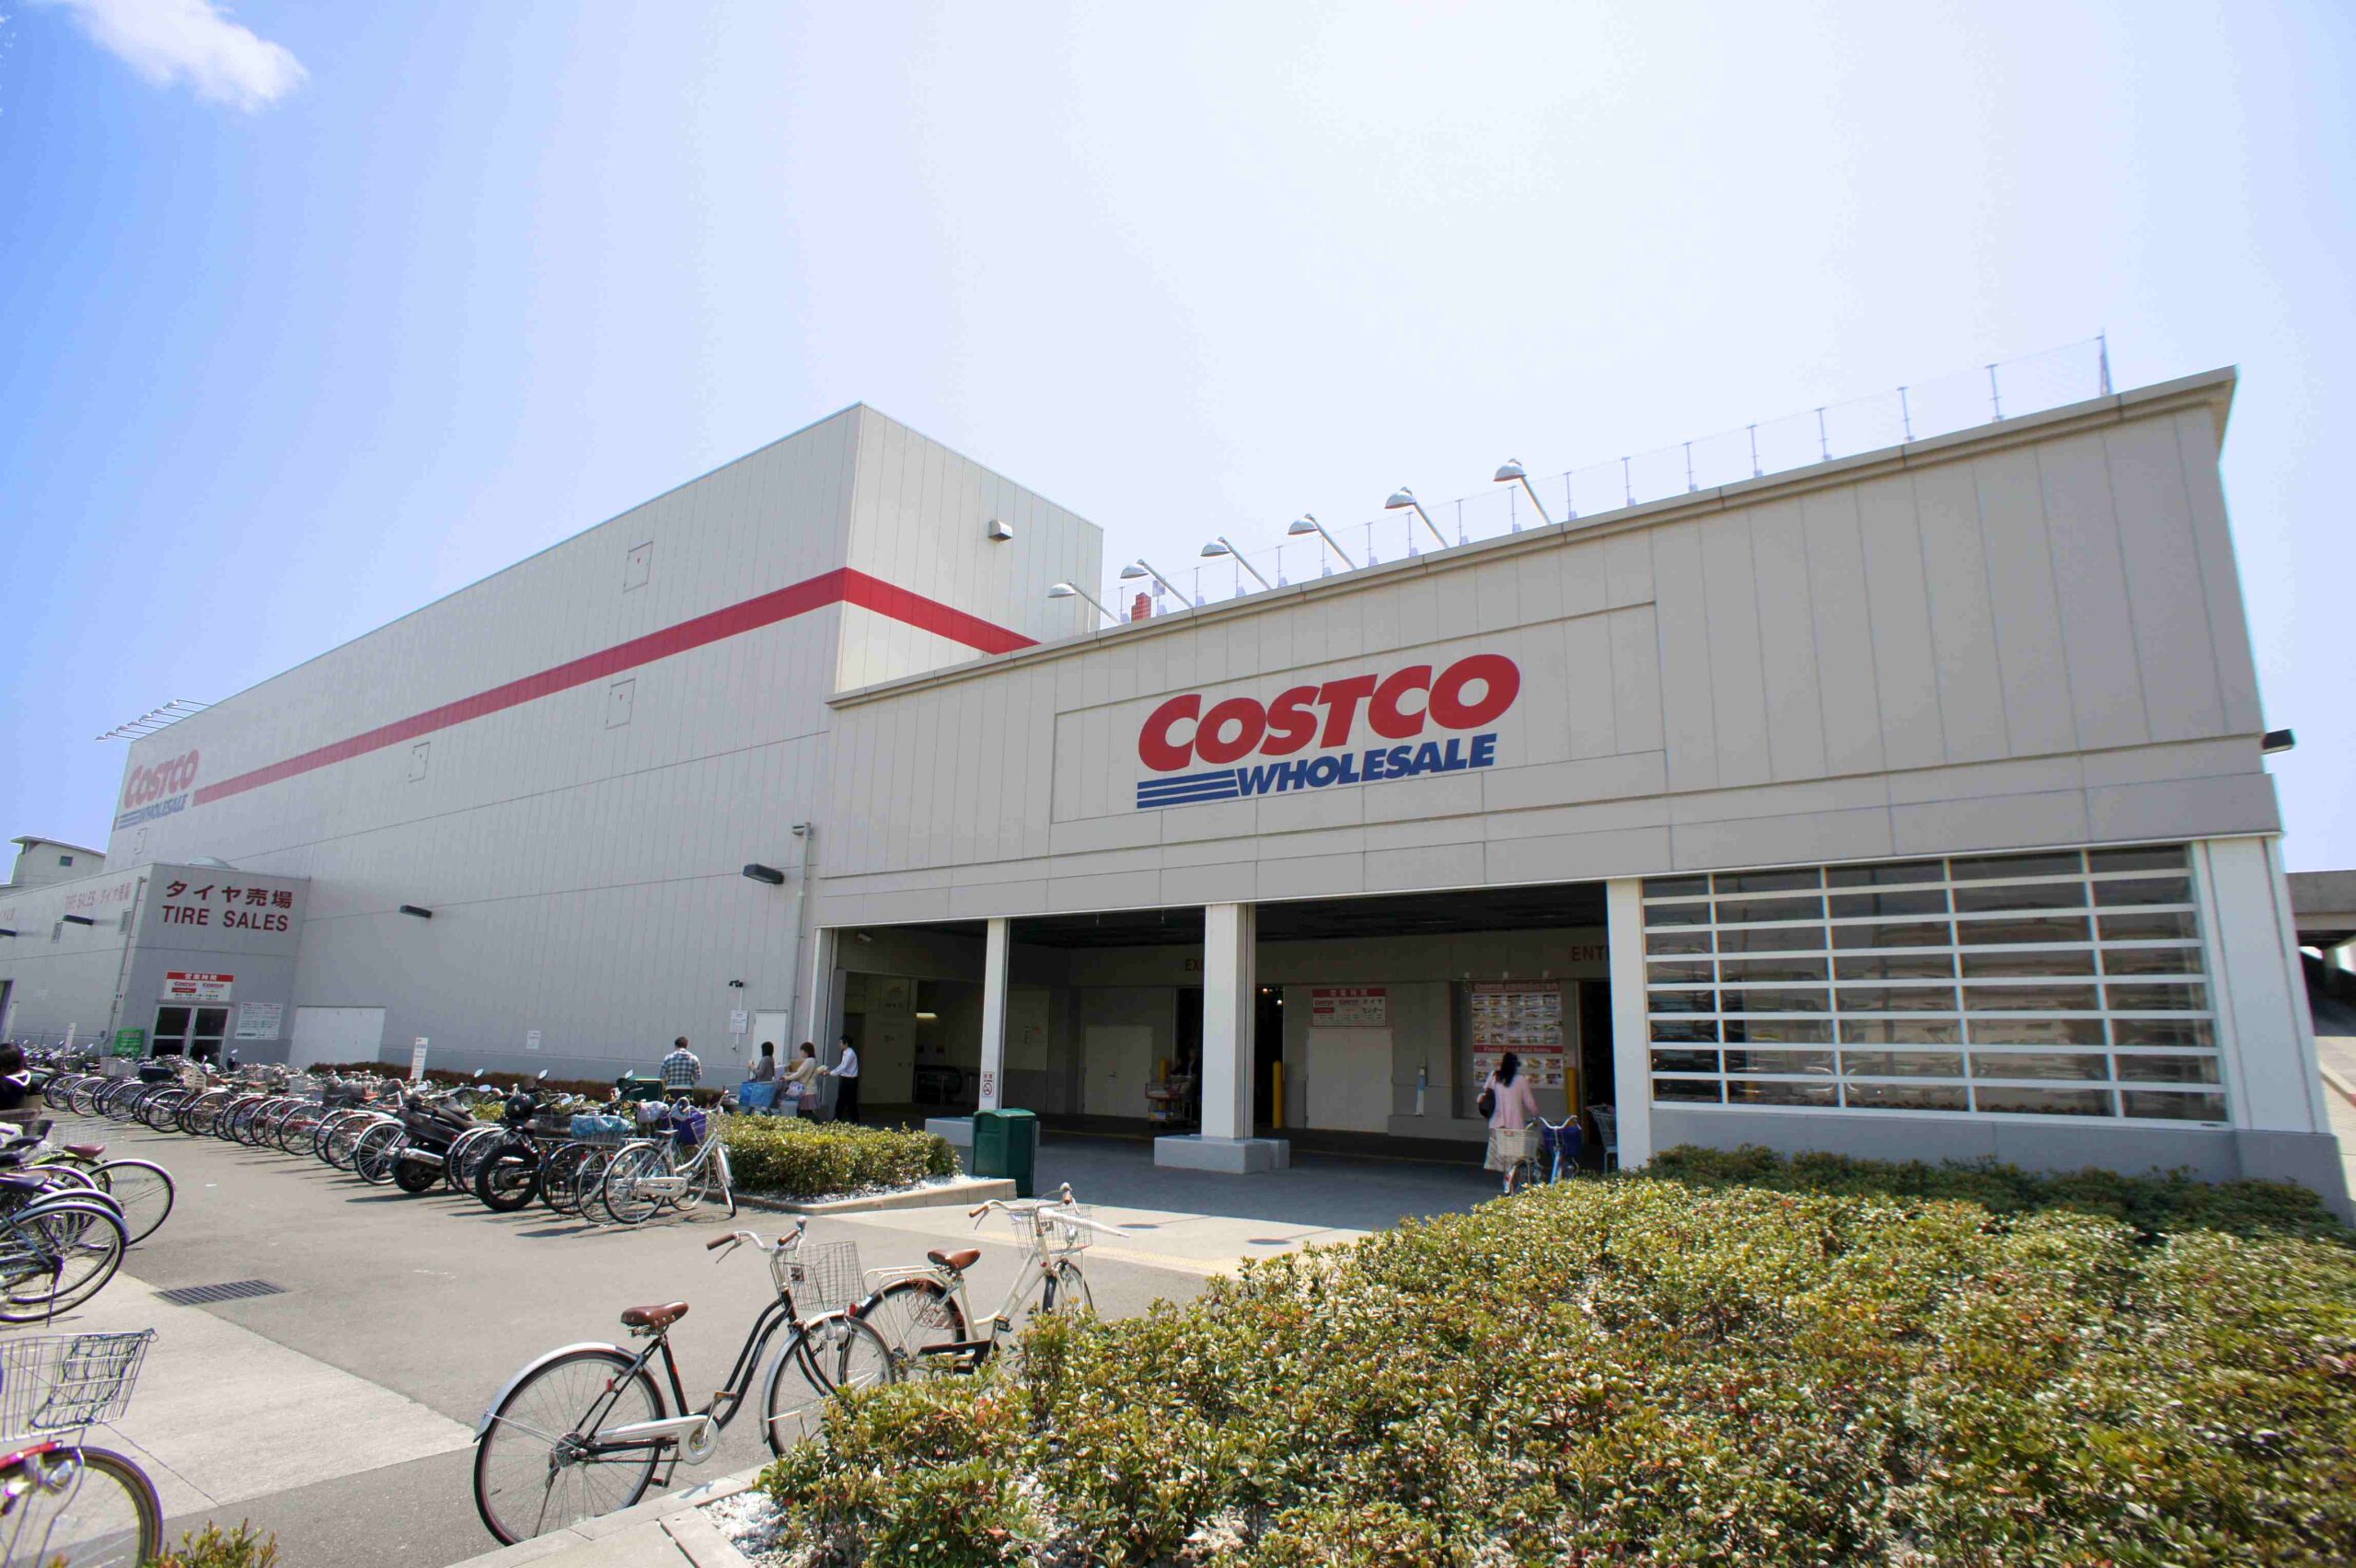 Costco January 2022 Coupon Book is Here with Best Deals